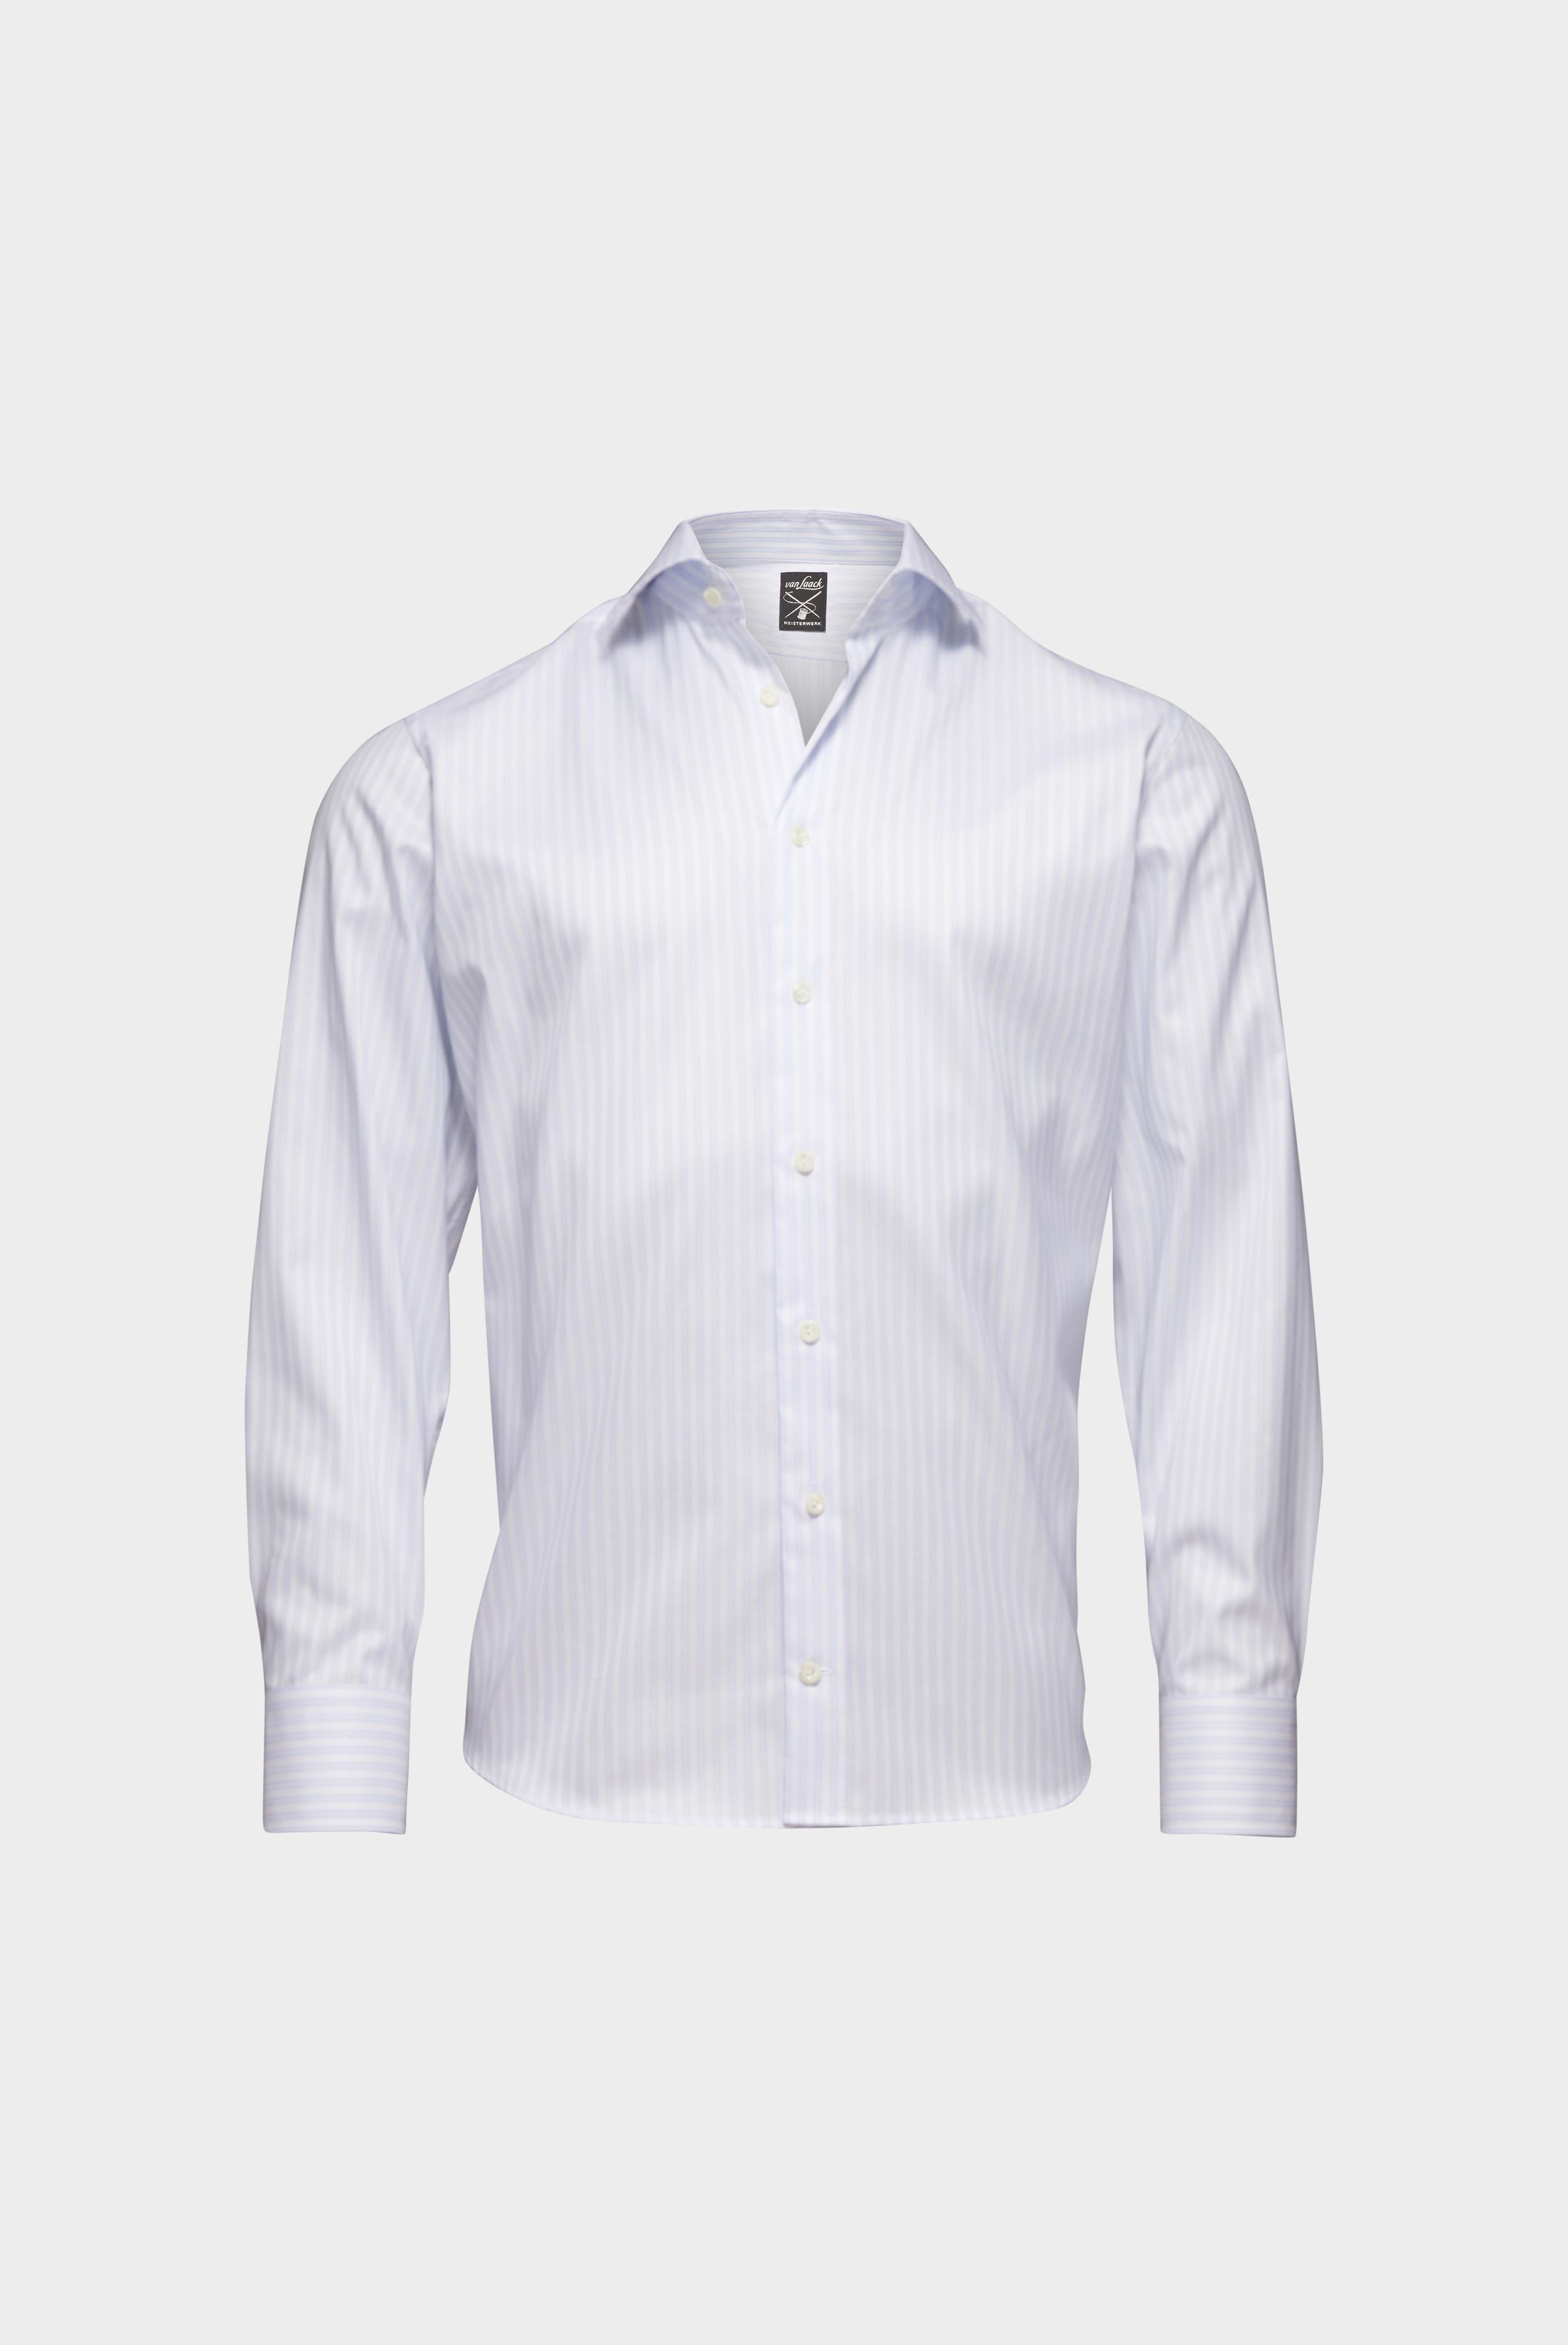 Easy Iron Shirts+Striped Wrinkle Free Shirt Tailor Fit+20.2020.BQ.161106.007.38